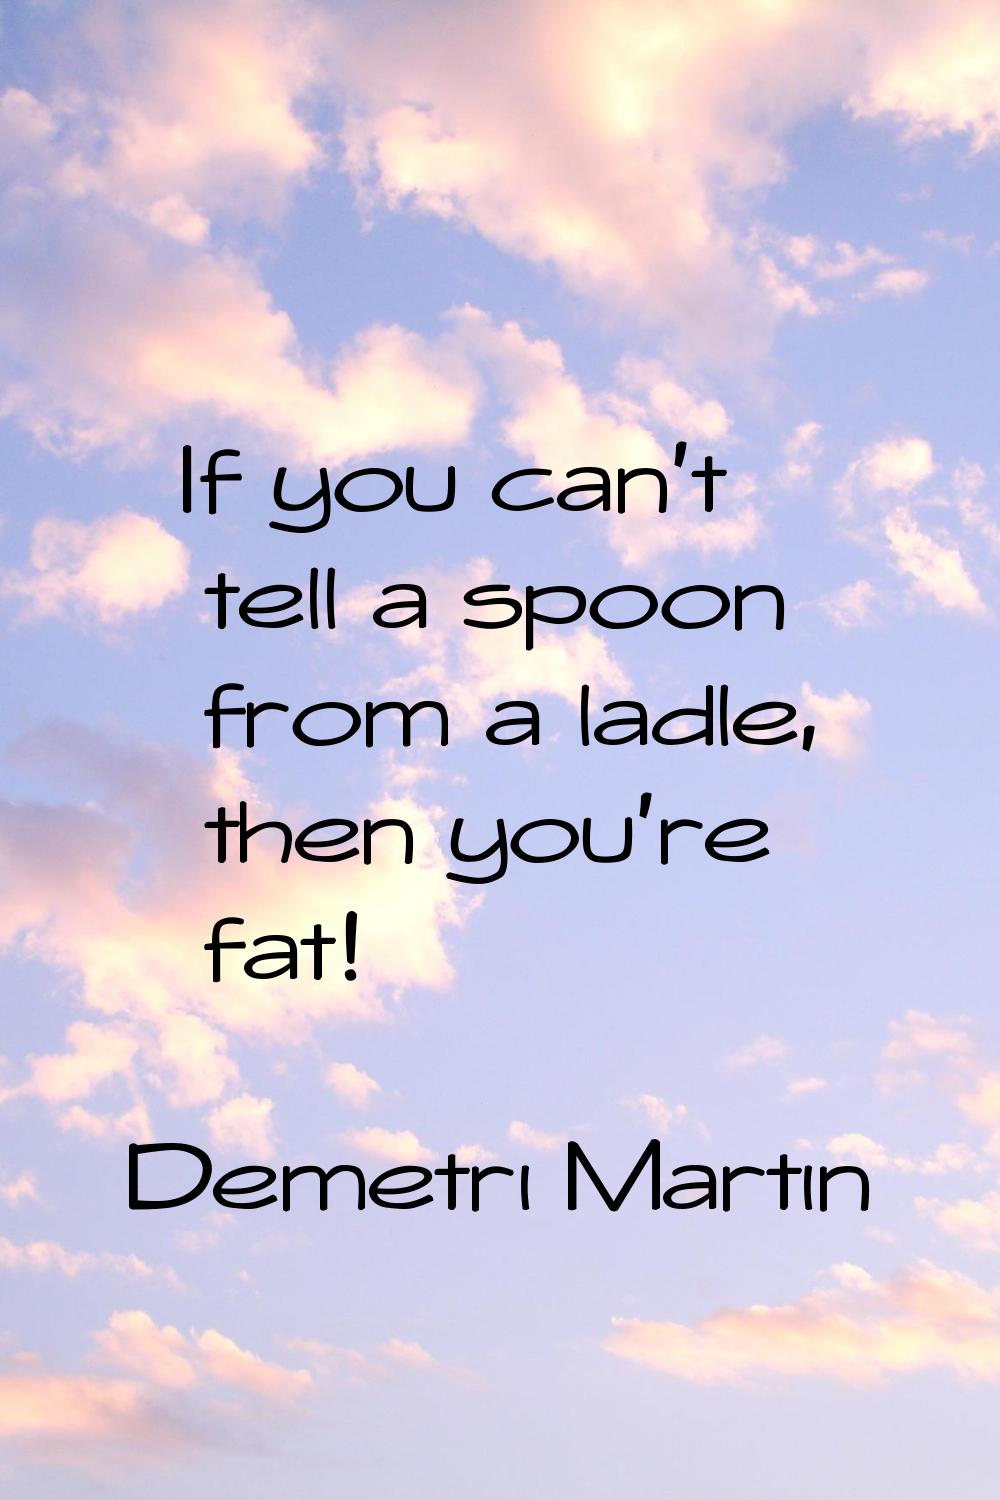 If you can't tell a spoon from a ladle, then you're fat!